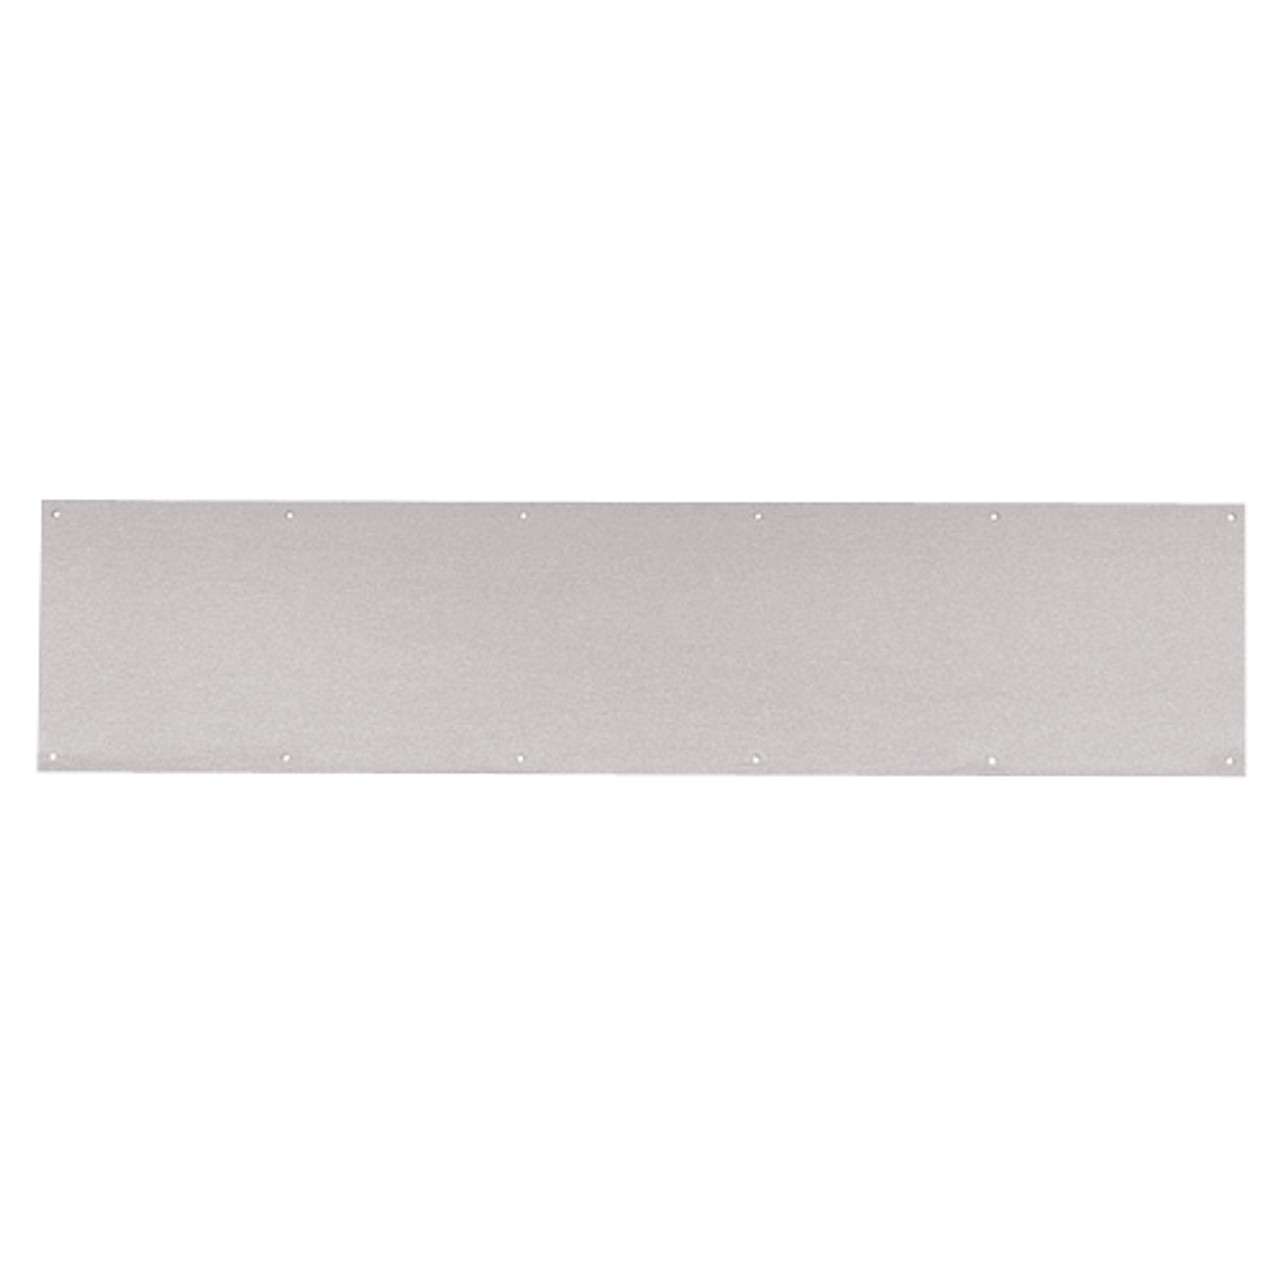 8400-US32D-12x48-B-CS Ives 8400 Series Protection Plate in Satin Stainless Steel